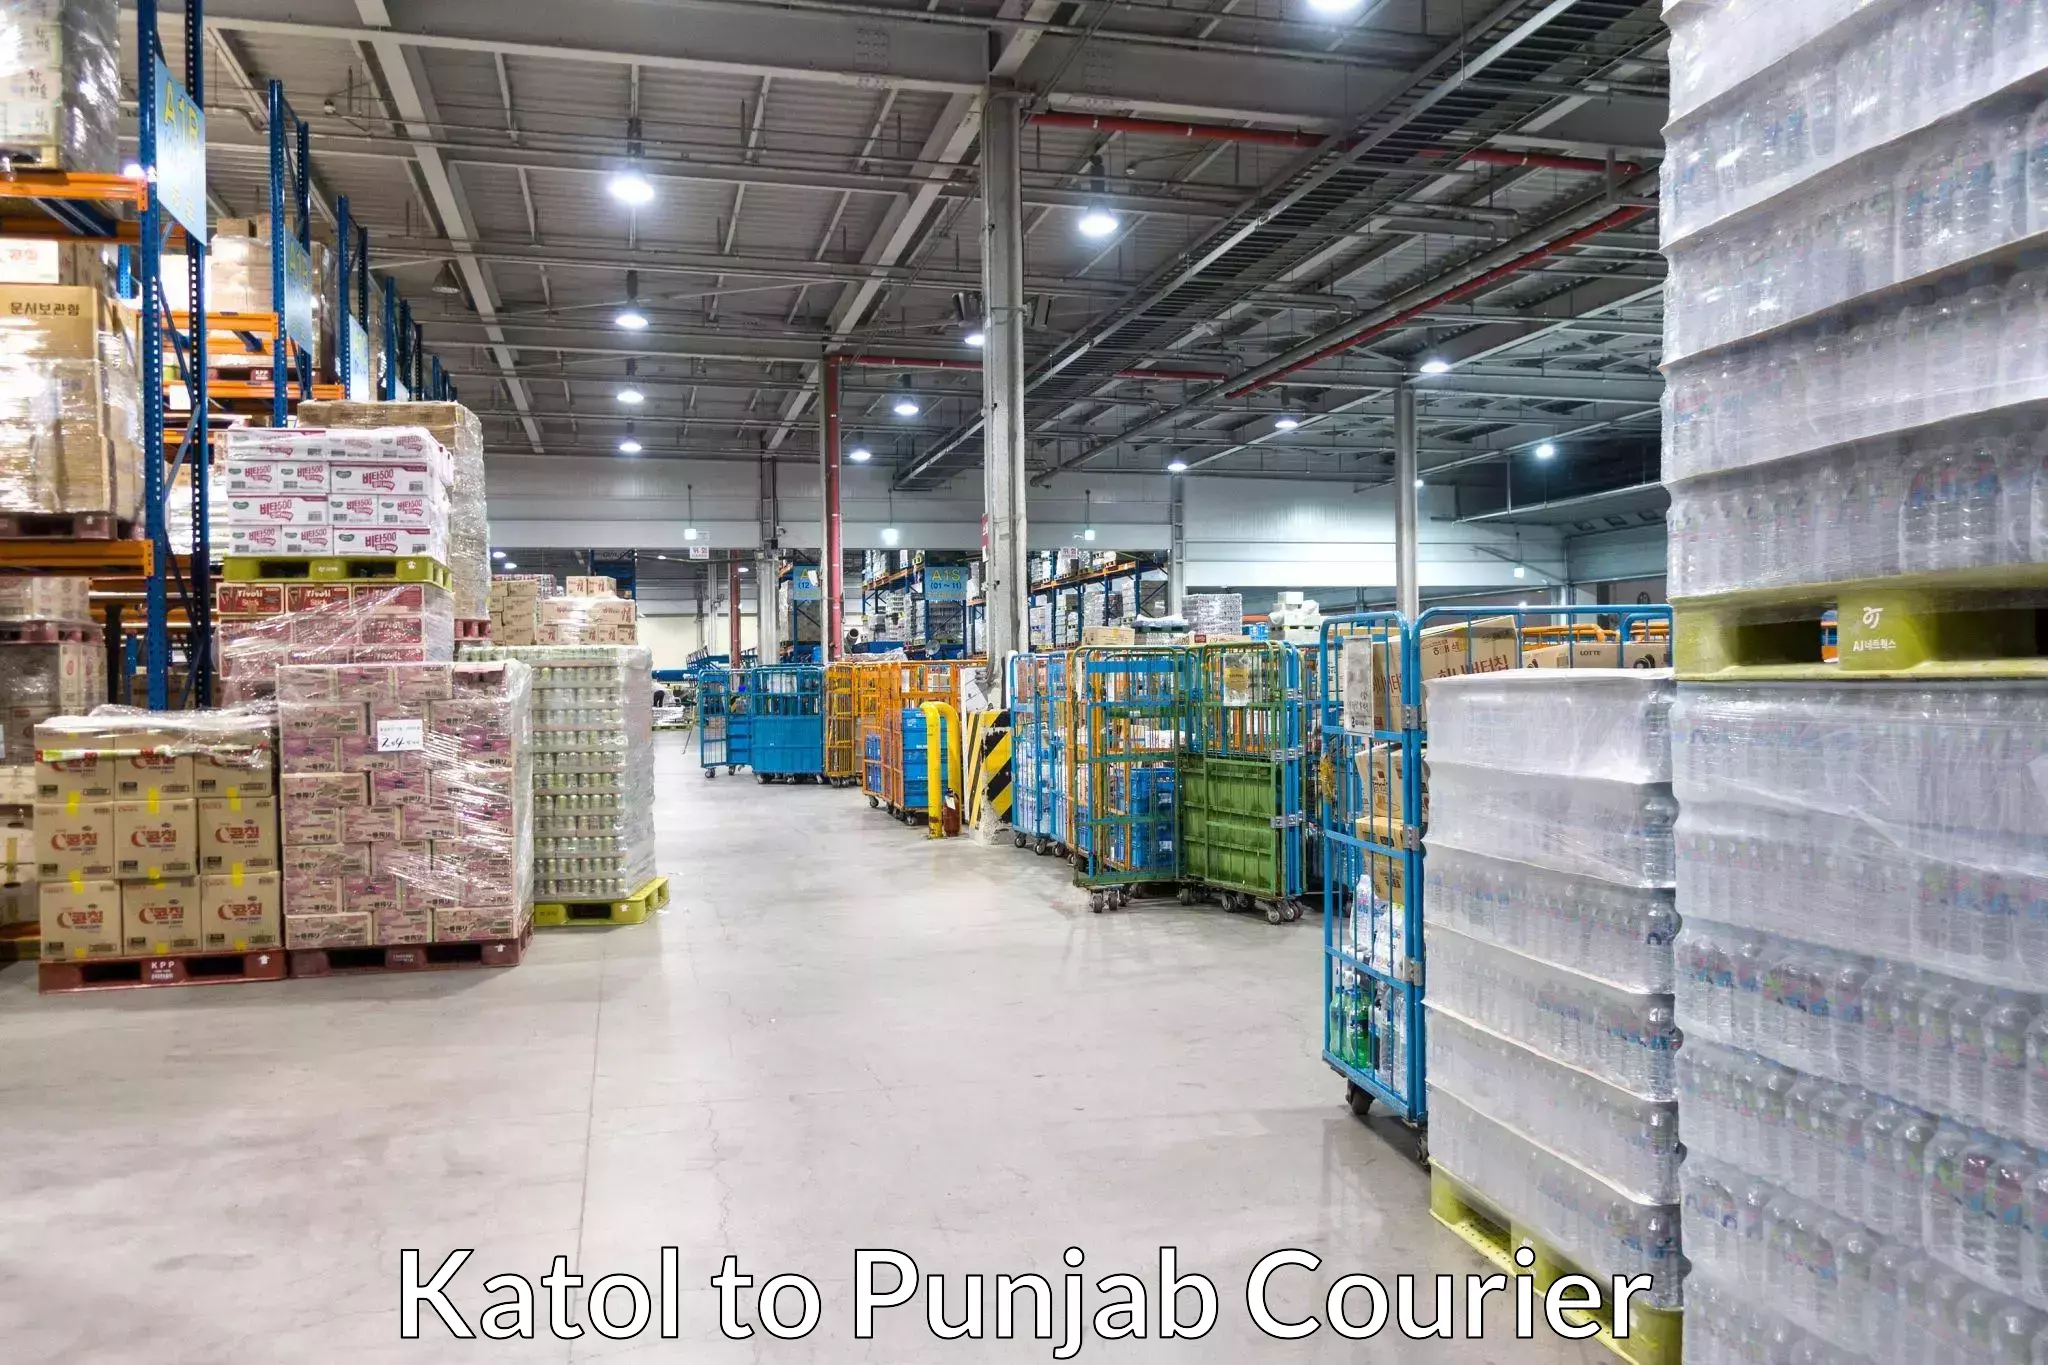 Premium courier solutions Katol to Mohali